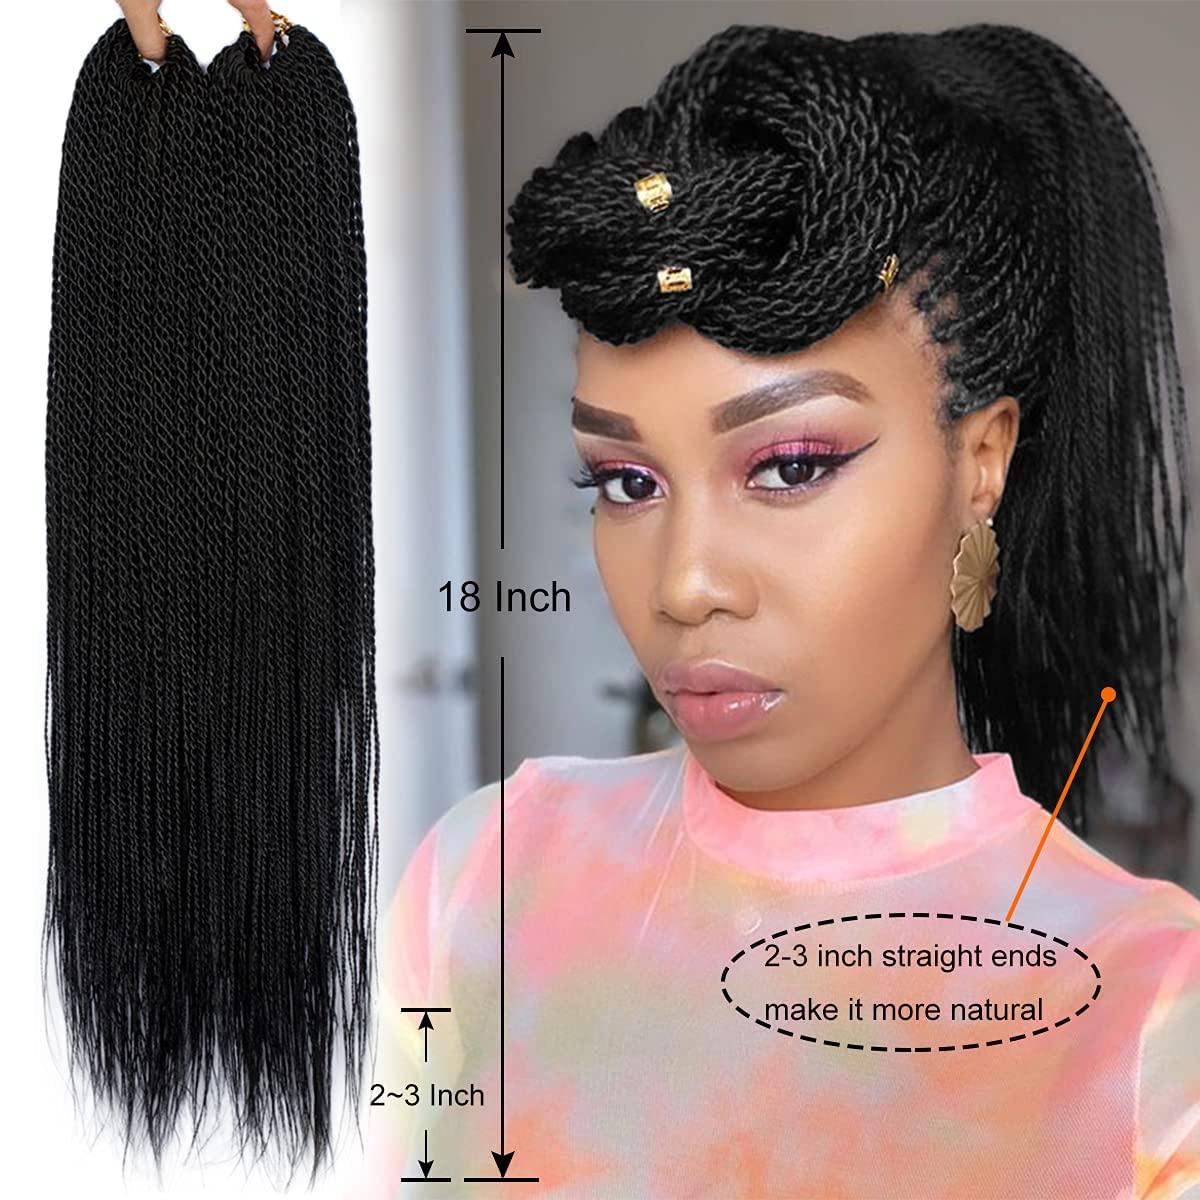 Senegalese Twist Crochet Hair - 8 Packs 18 Inch Crochet Hair For Black  Women, 35 Strands/Pack Small Twist Crochet Braids Hair Hot Water Setting,  Crochet Braiding Hair with Natural Ends(18 Inch, 1B)